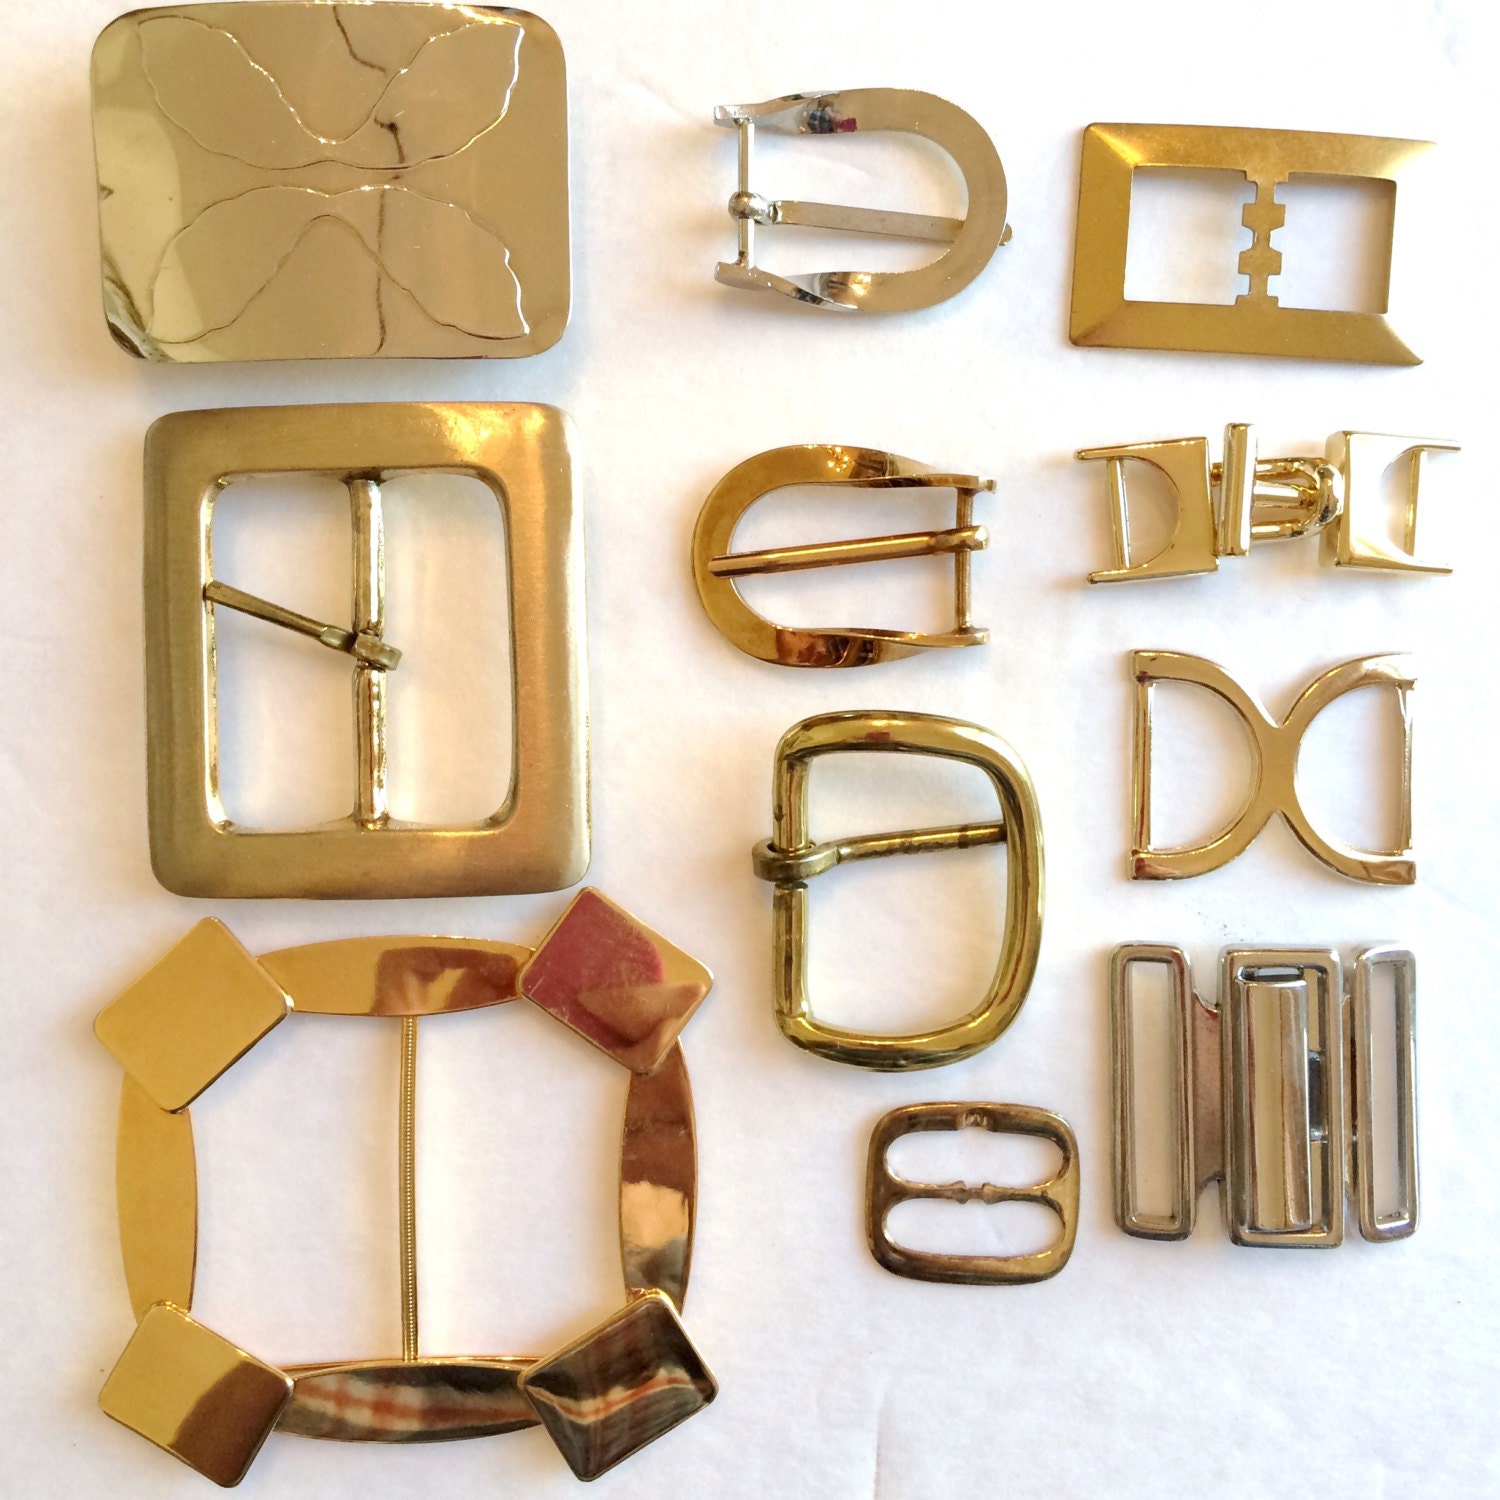 Vintage Metal Buckles . Retro Belts Sewing Fashion Accessories Pants ...